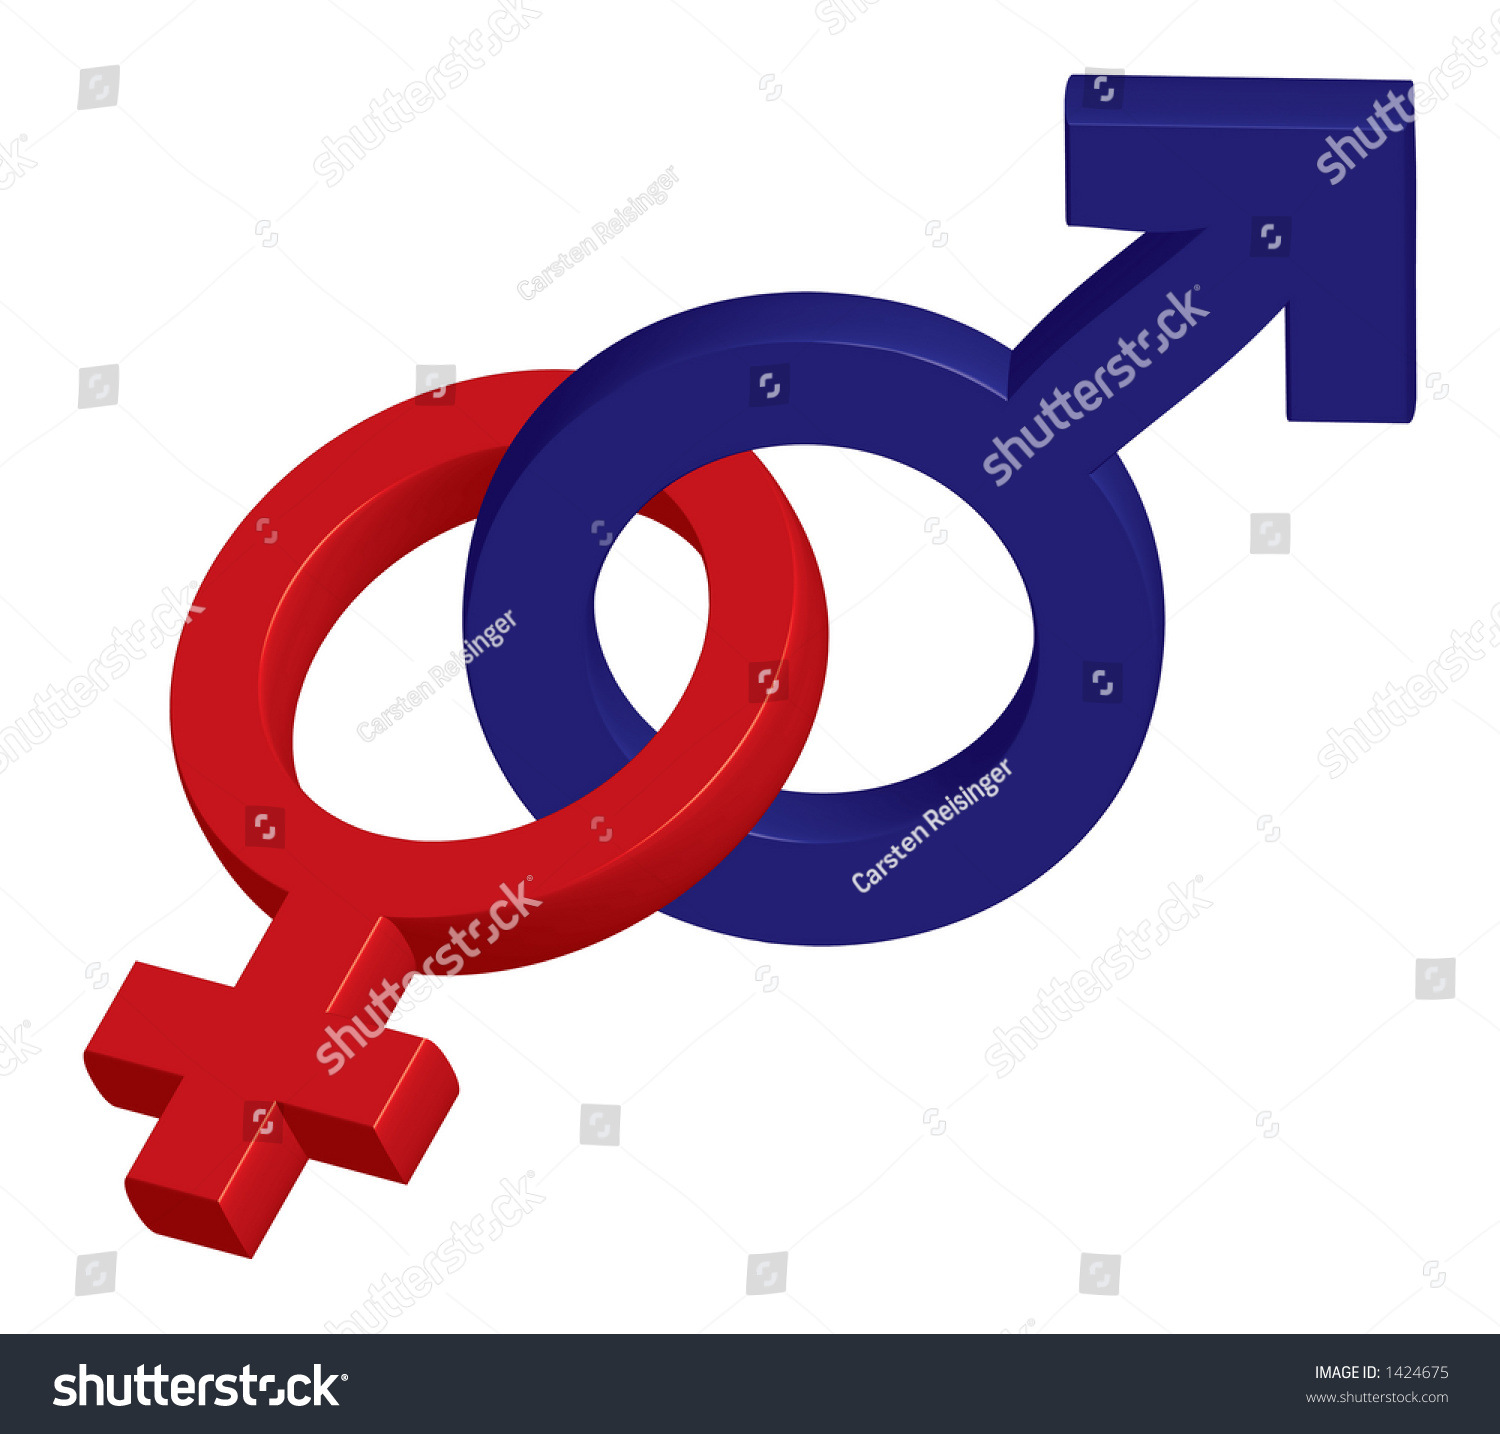 Male Female Symbol Intertwined Clipping Path Stock Illustration 1424675